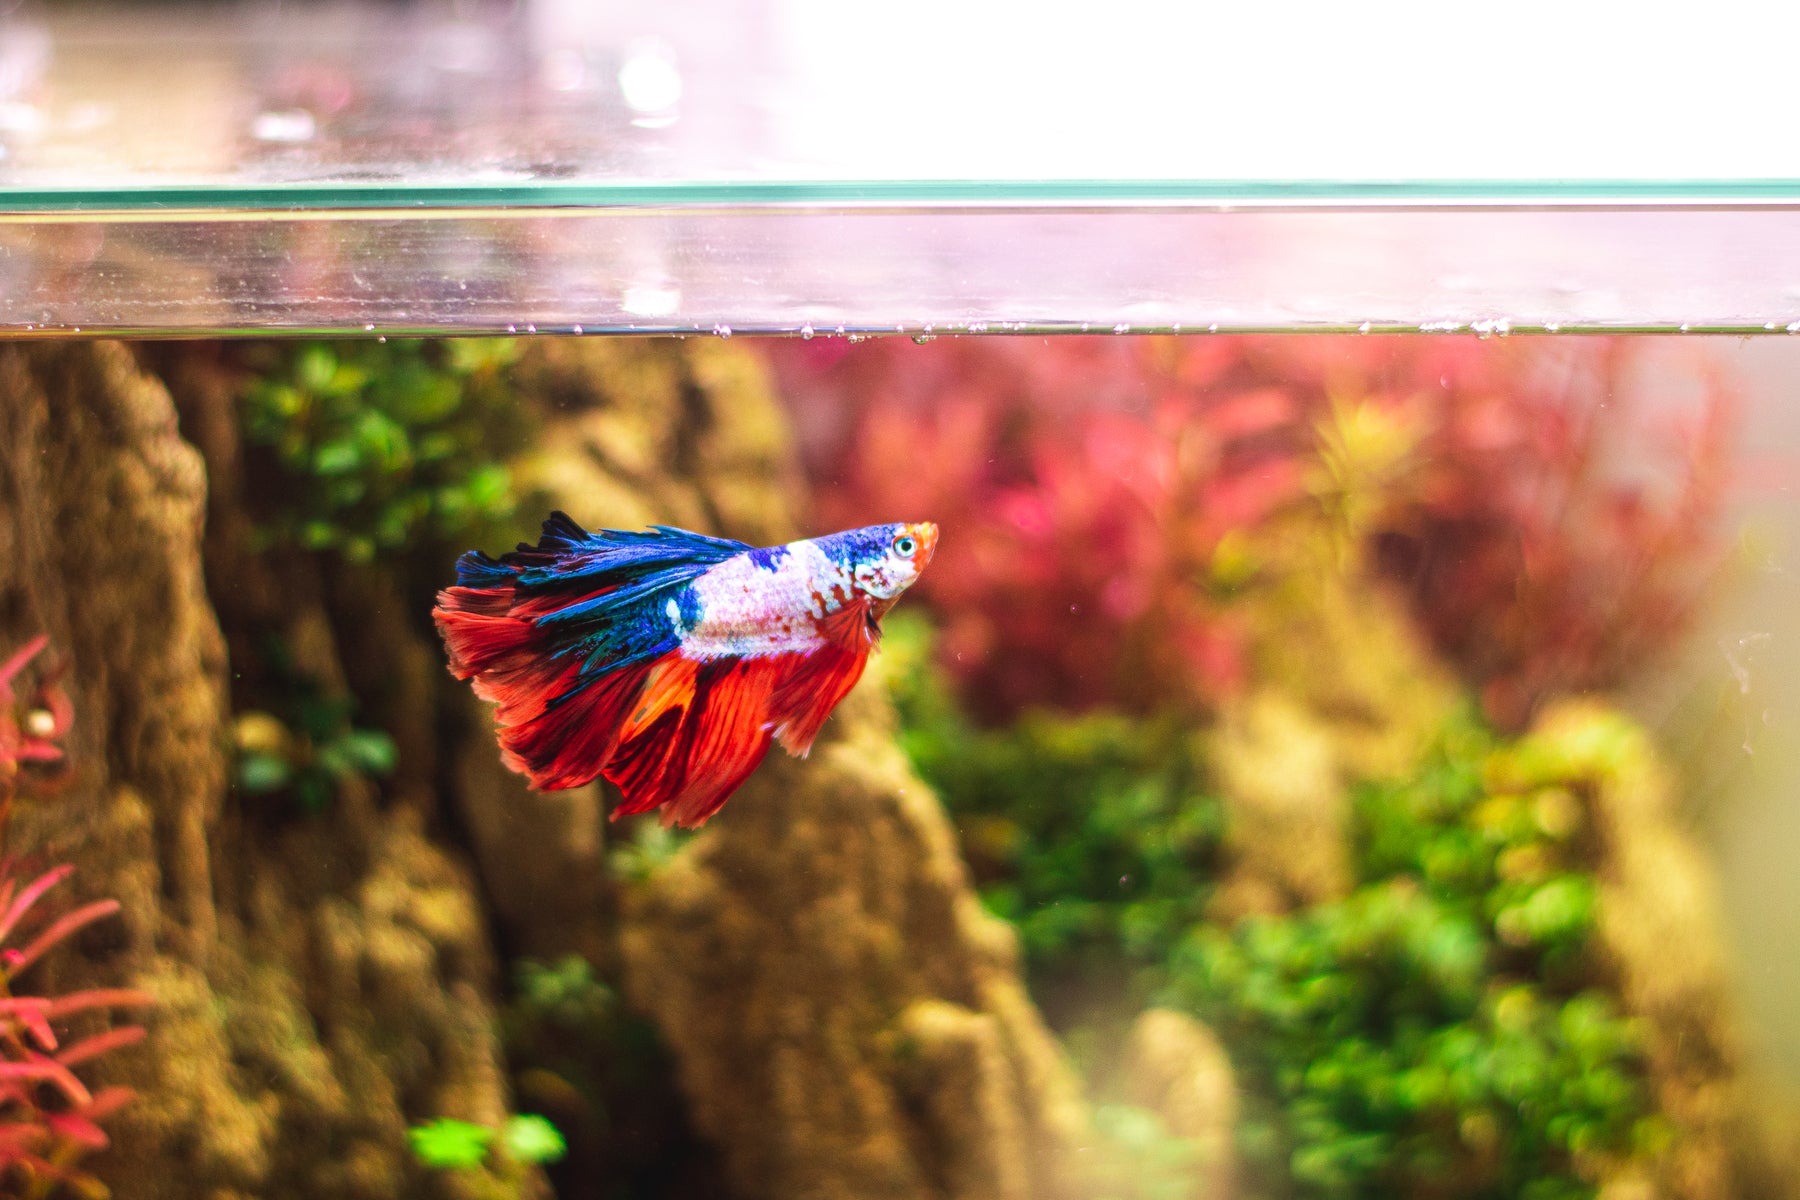 Keeping Bettas: How to Care for a Betta Fish